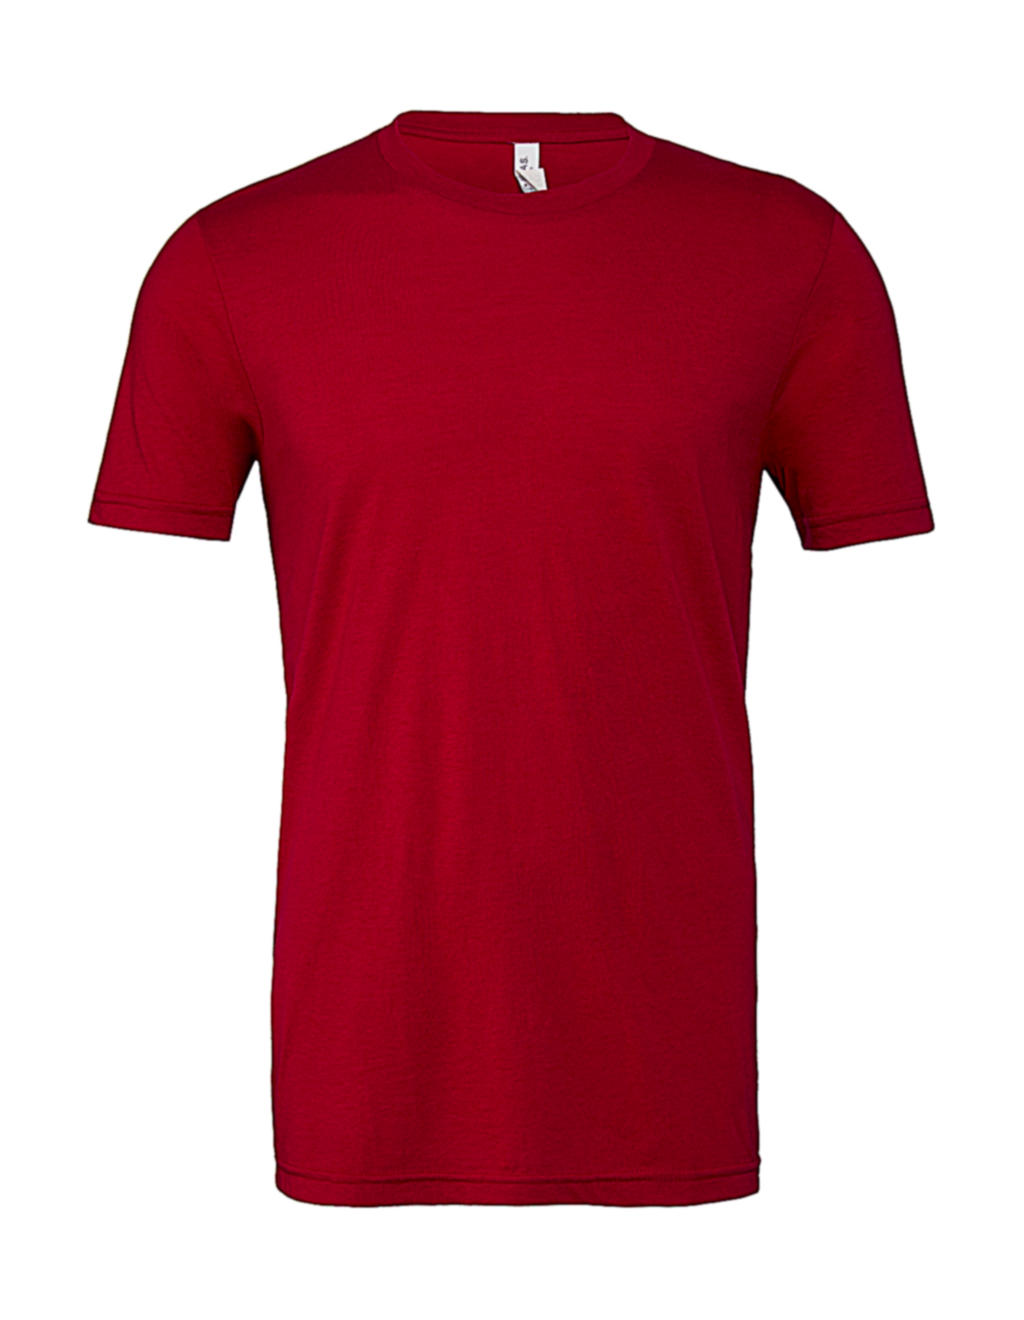  Unisex Triblend Short Sleeve Tee in Farbe Solid Red Triblend